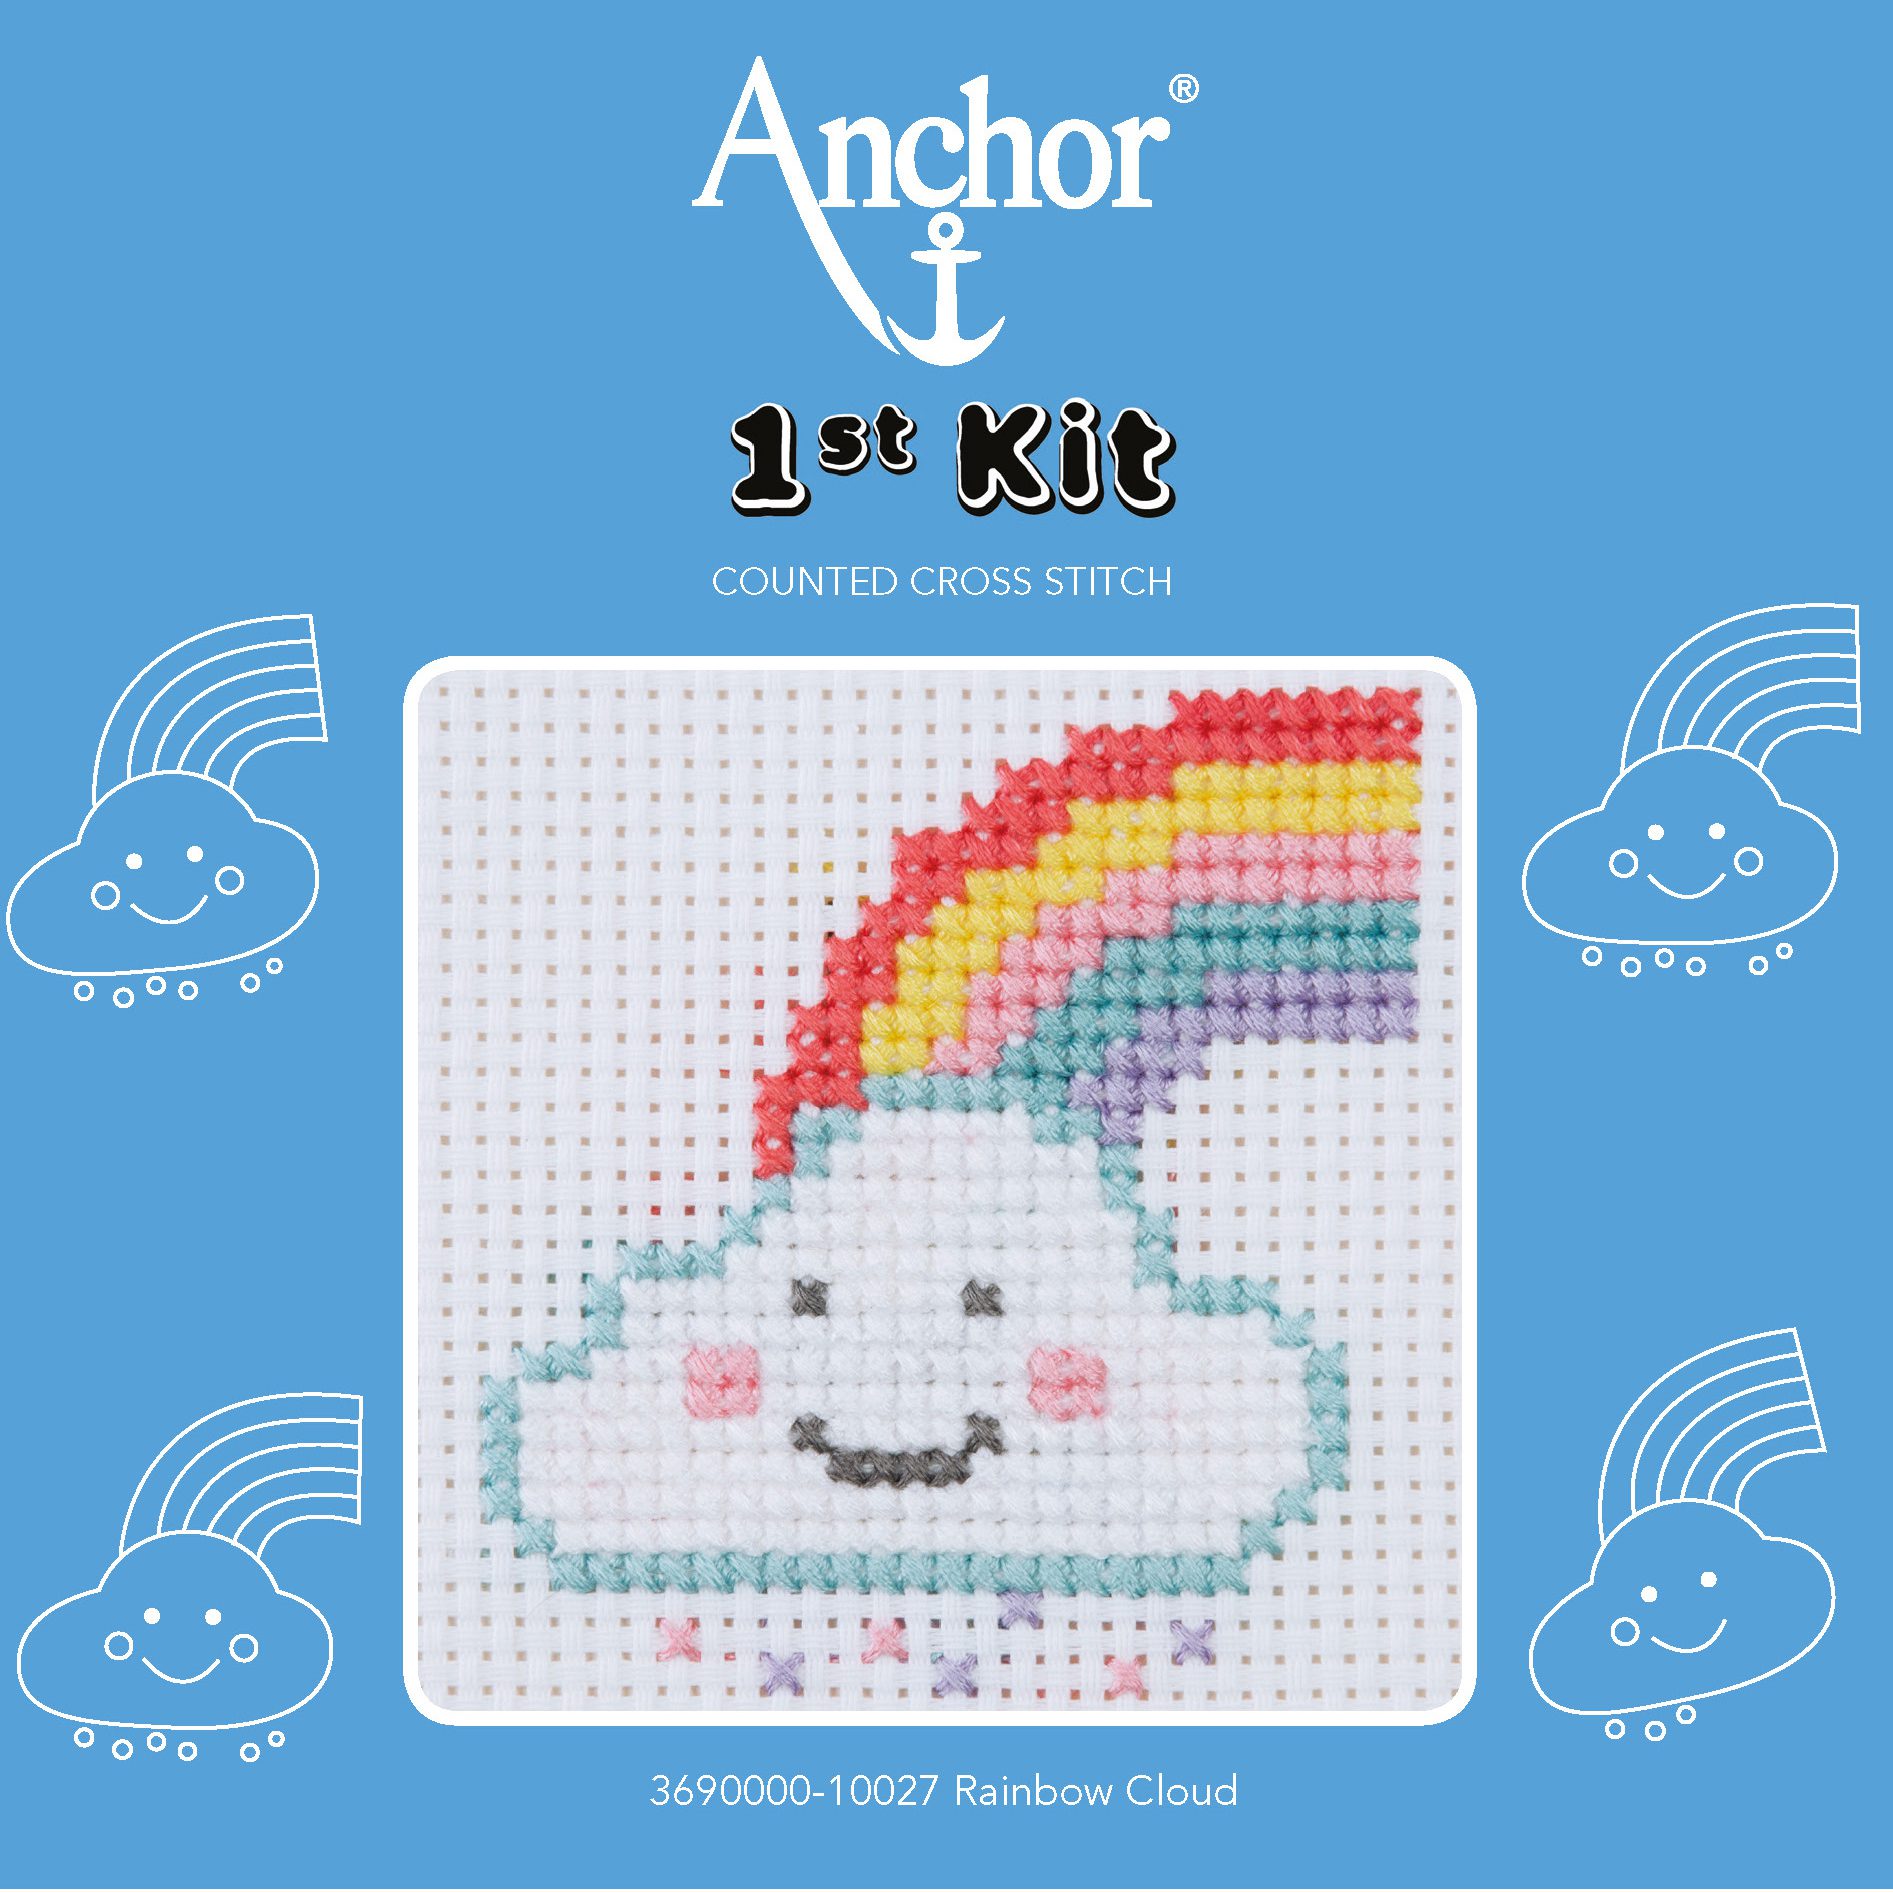 Anchor 1st Counted Cross Stitch Kit - Rainbow Cloud product image